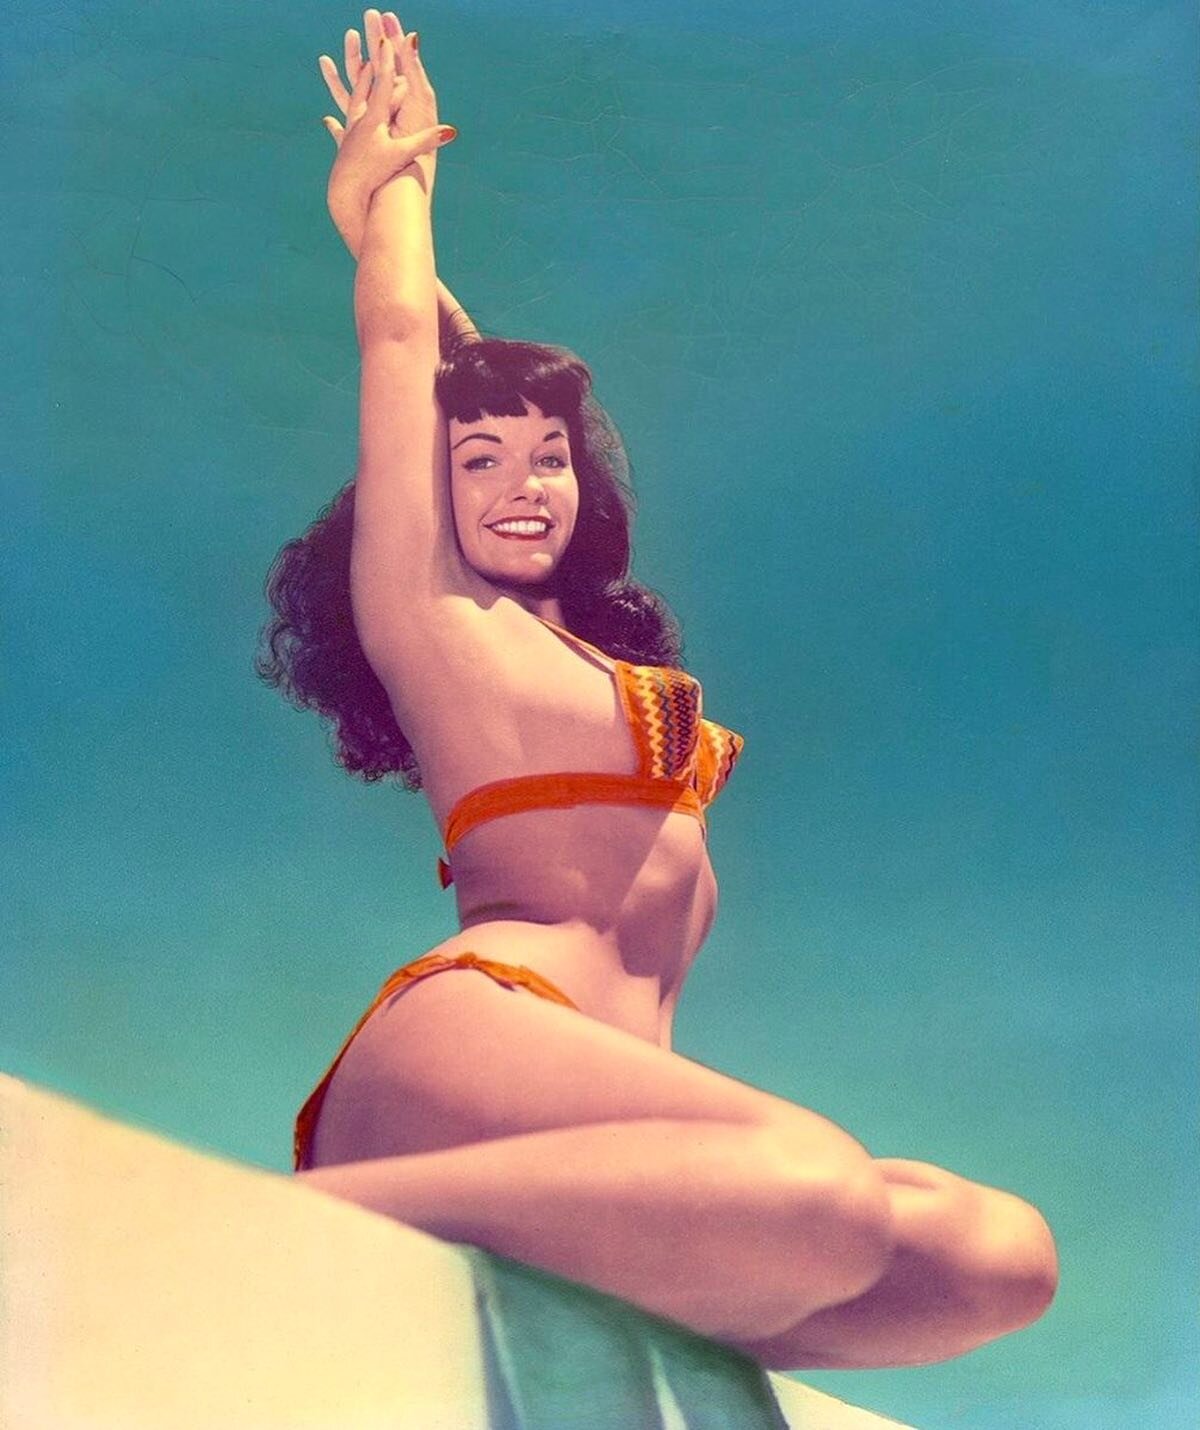 💥 Keep reaching for freedom!! ✨Happy Fourth, y&rsquo;all! 💕

#bettiepage #pinup #bunnyyeager #fitness #pinupgirl #1950s